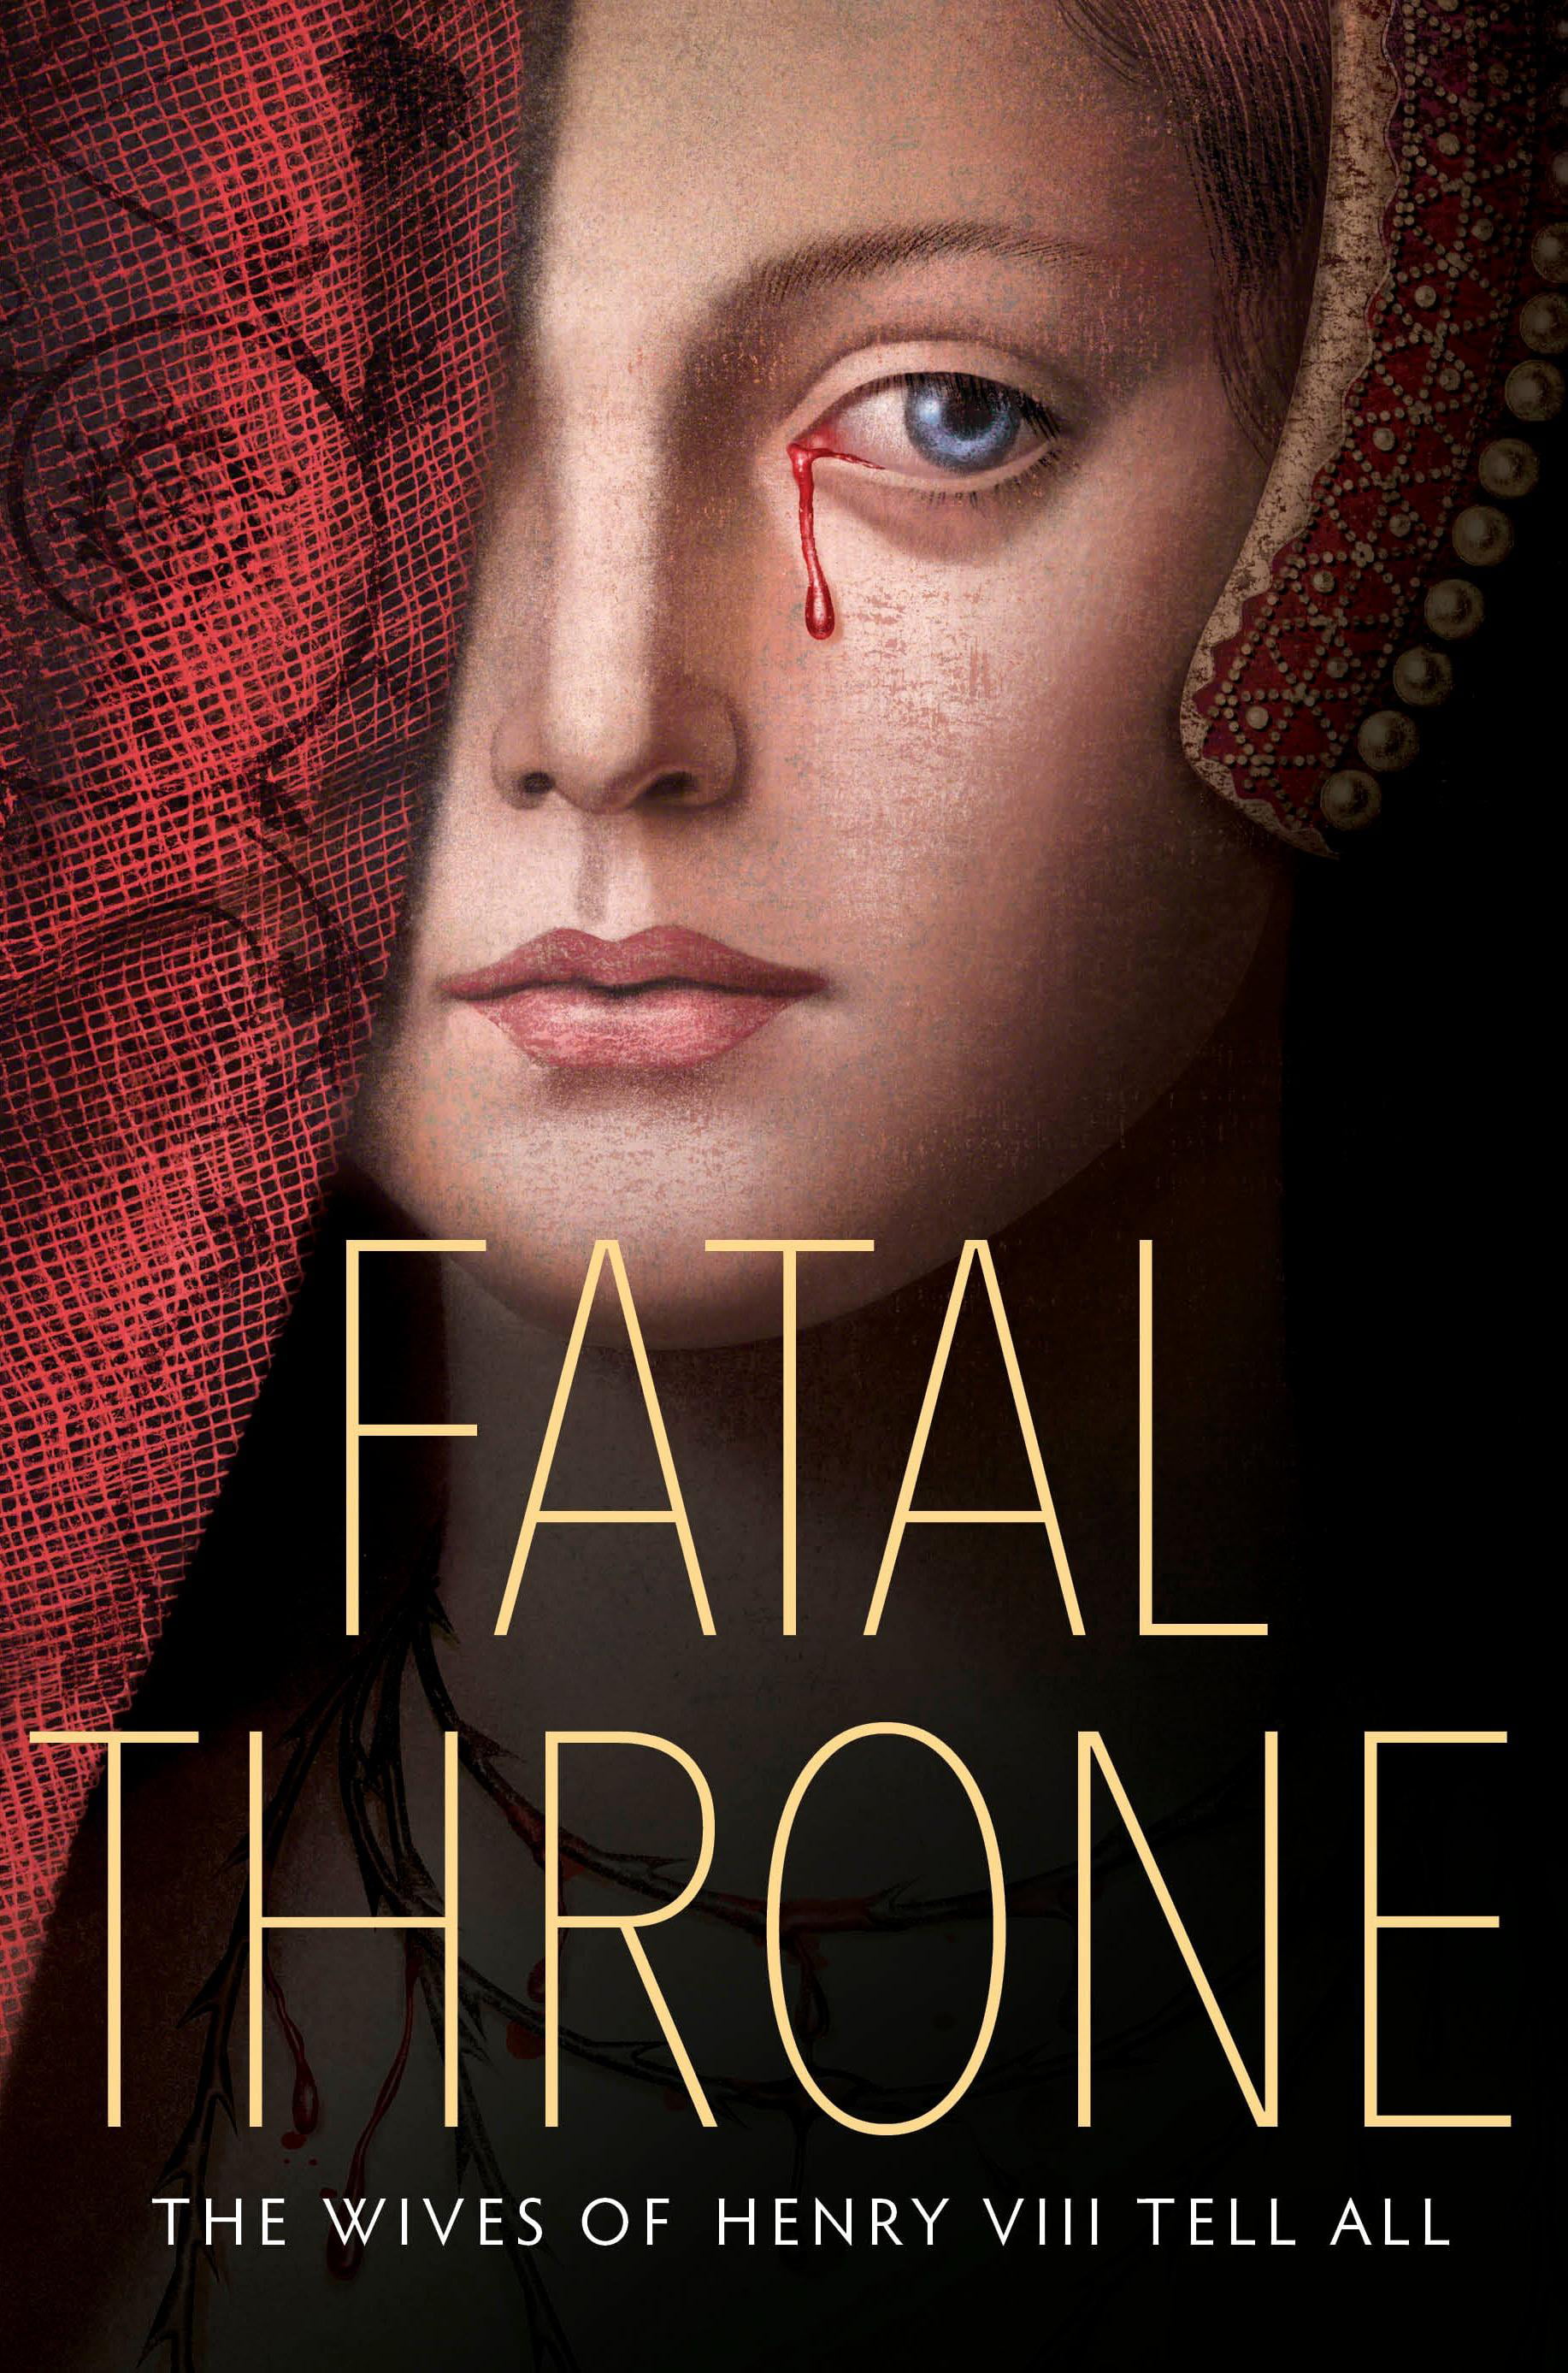 fatal throne the wives of henry viii